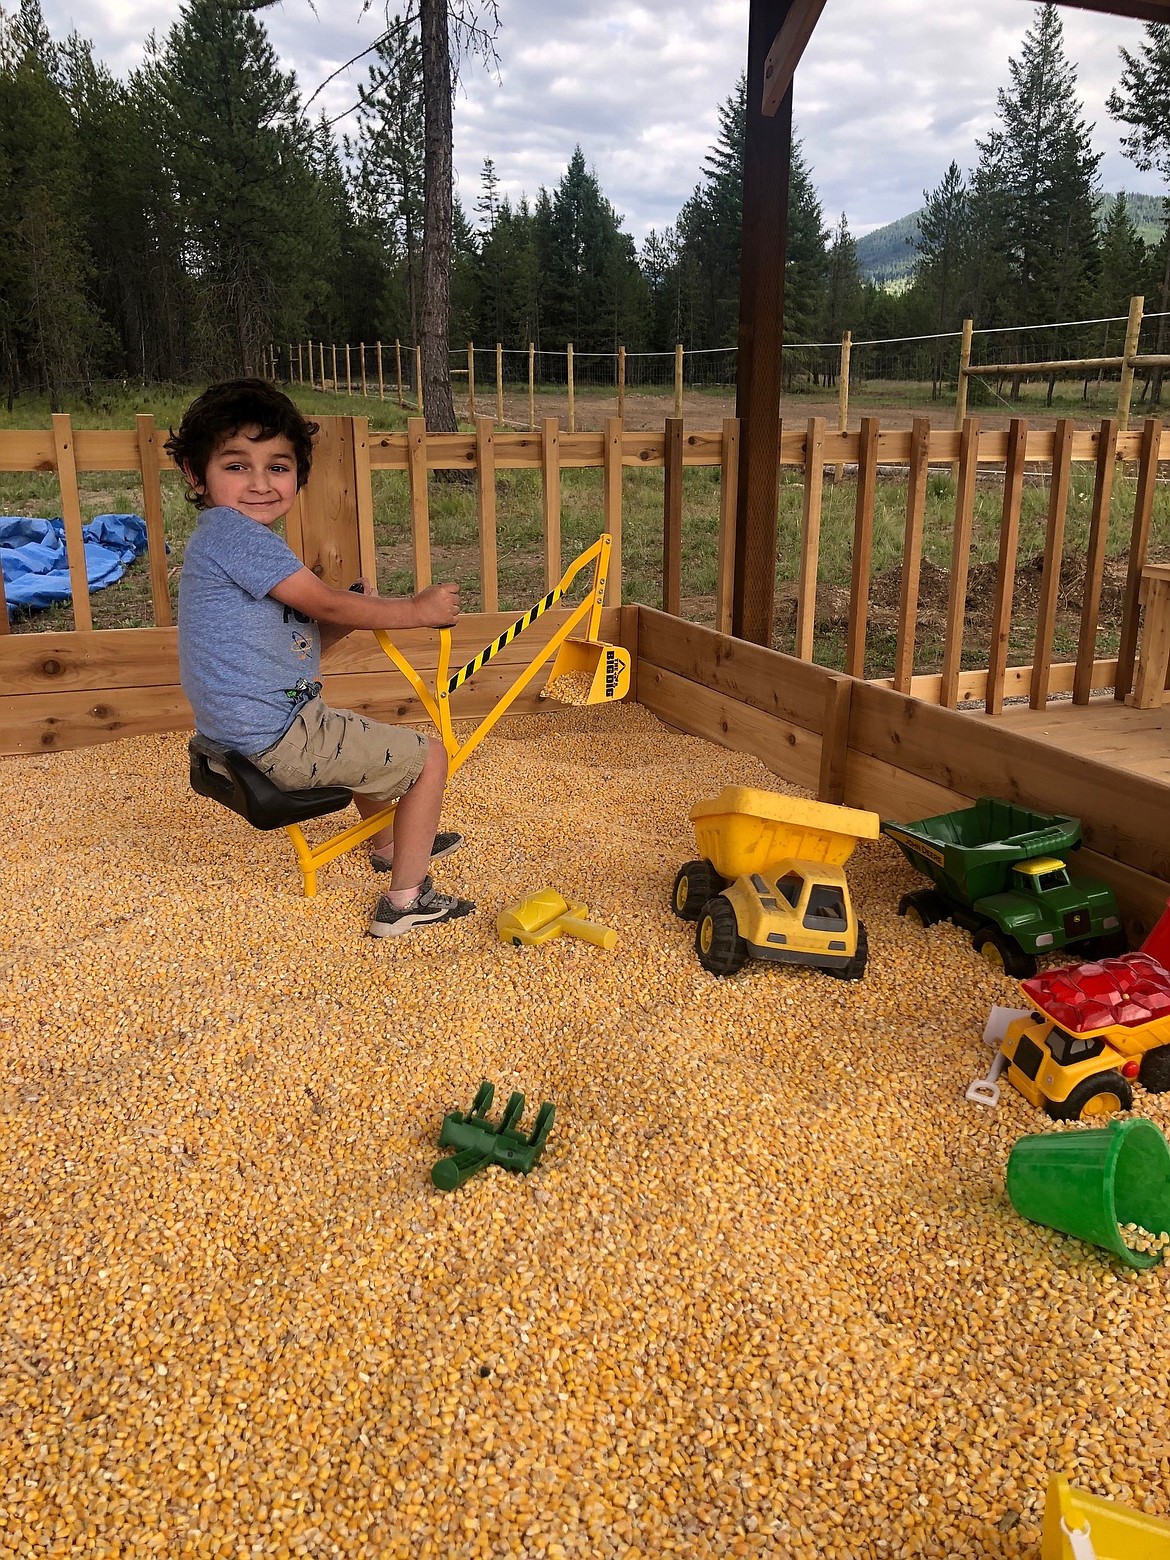 Courtesy photo
Monty and Laura Winter’s grandson, Ollie Winter, plays in the corn pit.